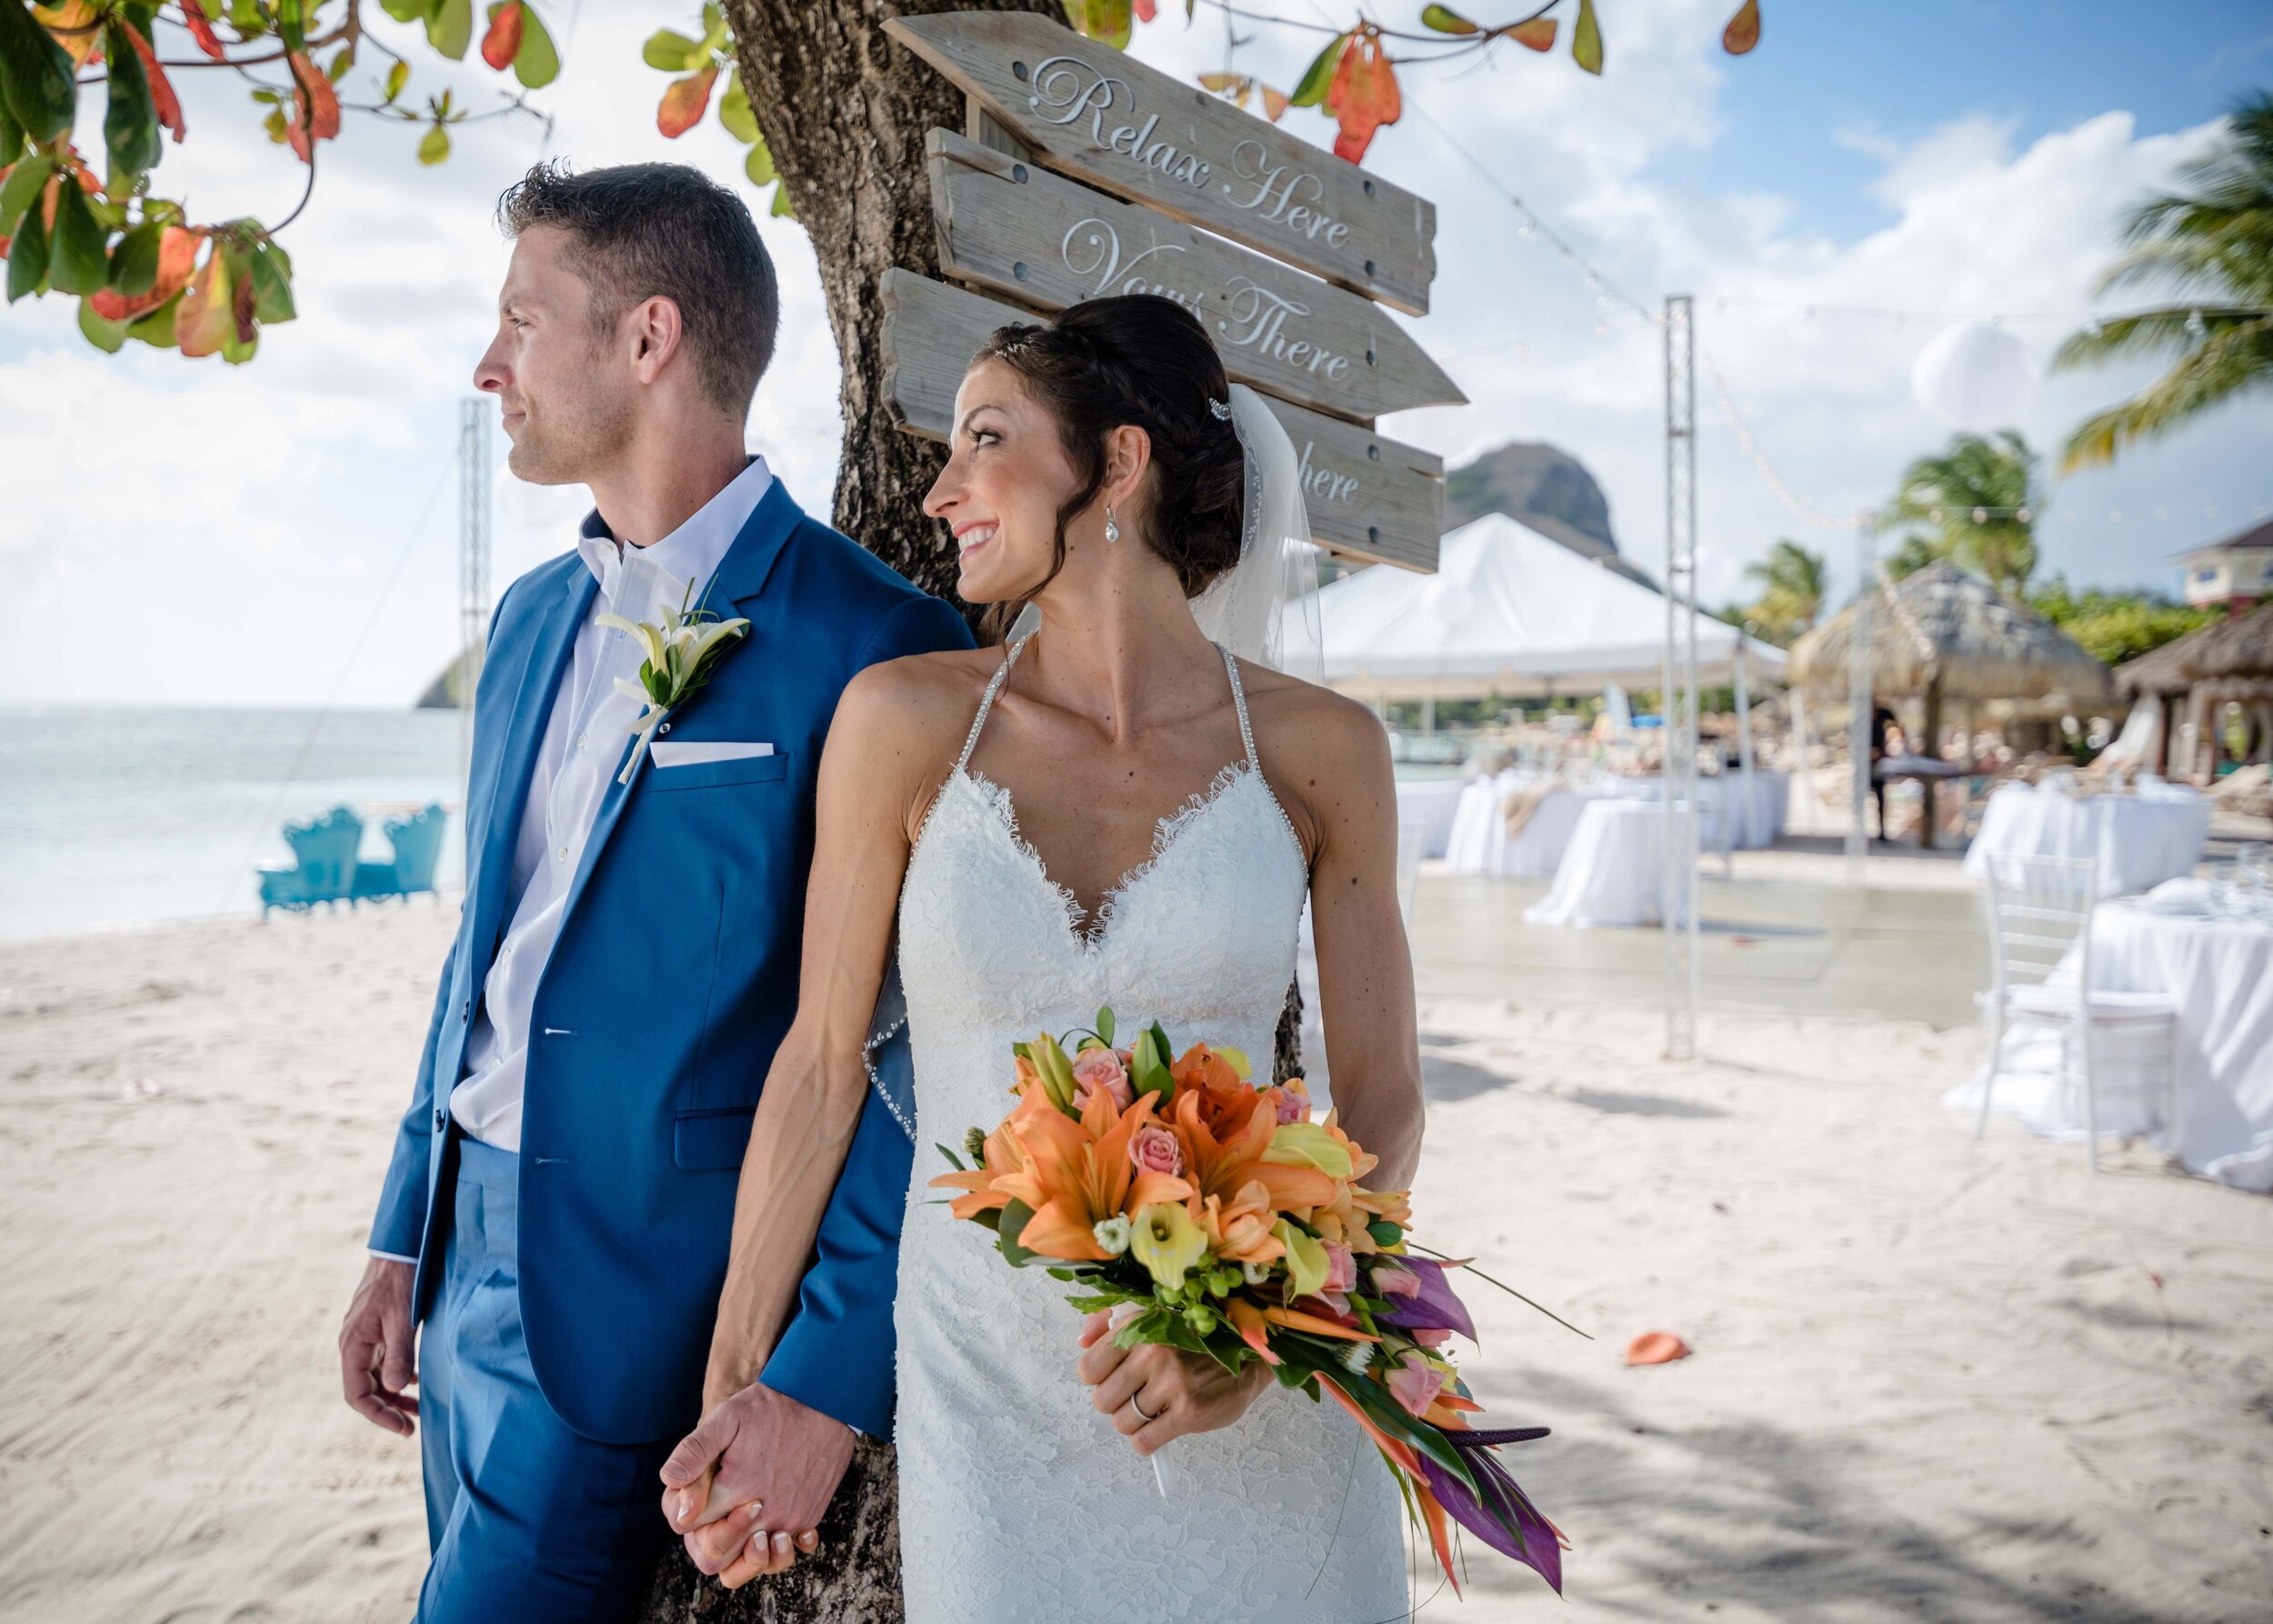 New Sandals Virtual Wedding Planning Experience-Sandals Packages and News